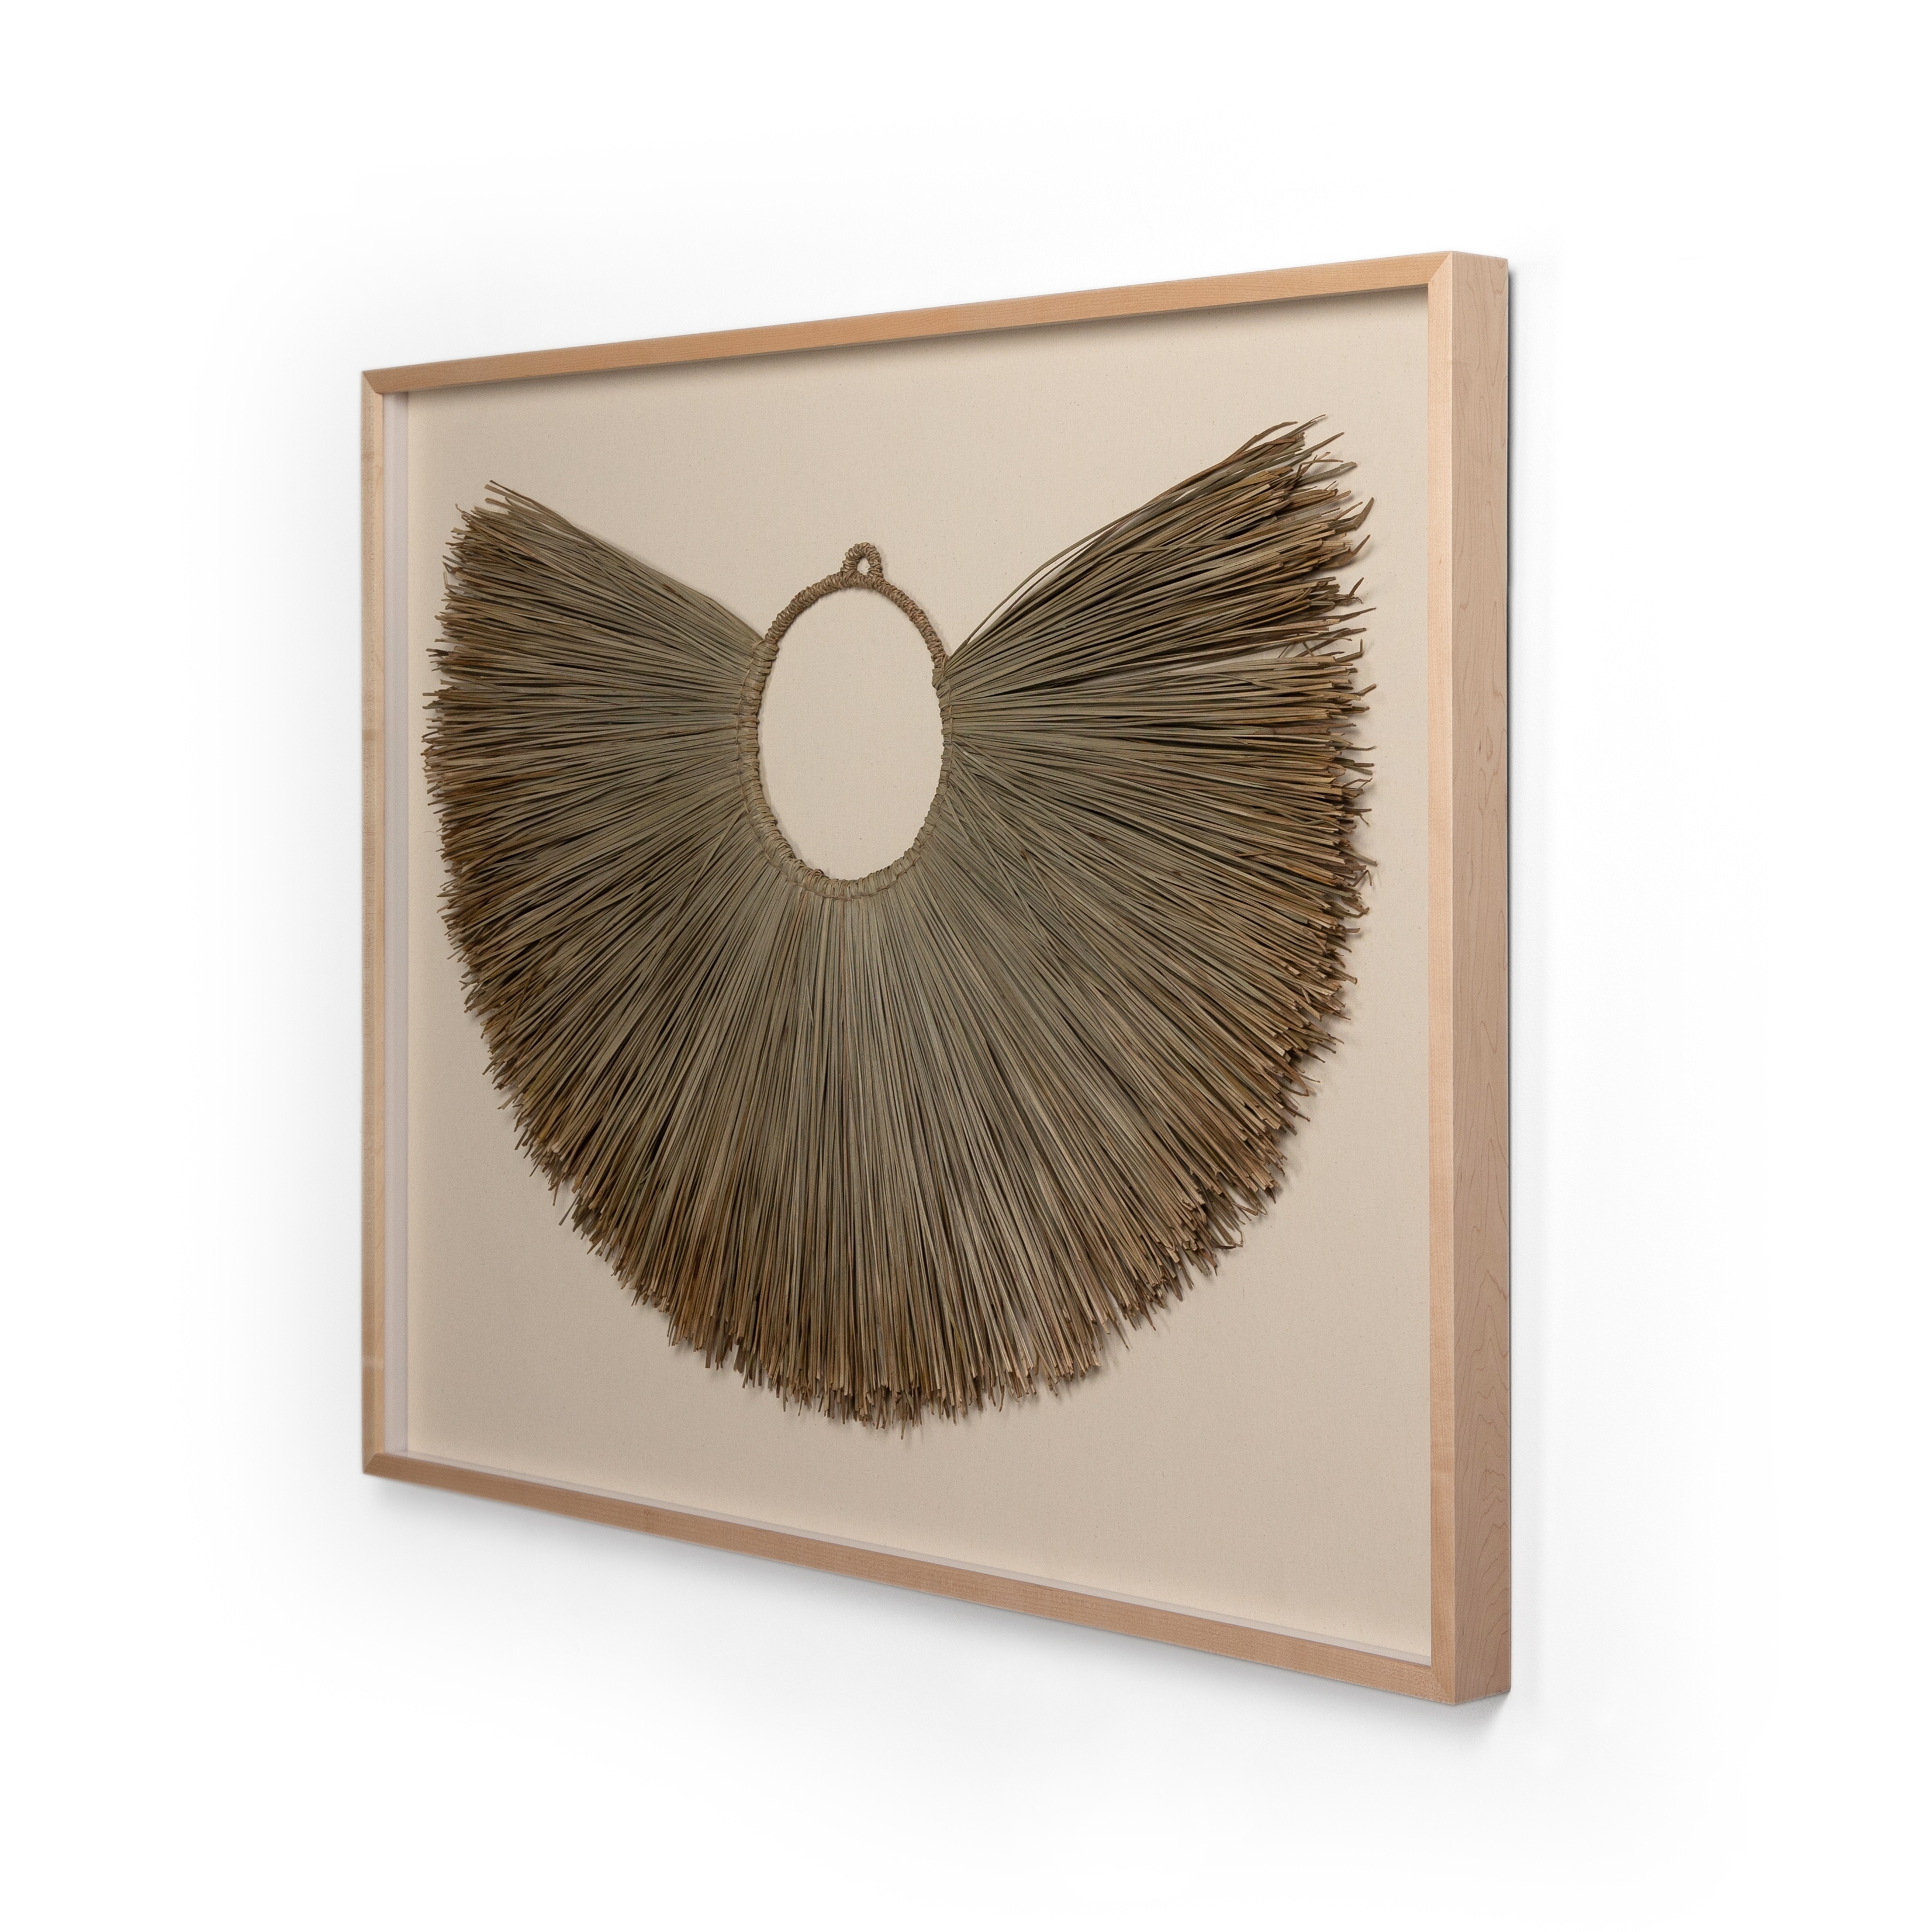 Beda Framed Seagrass Object - Image 2